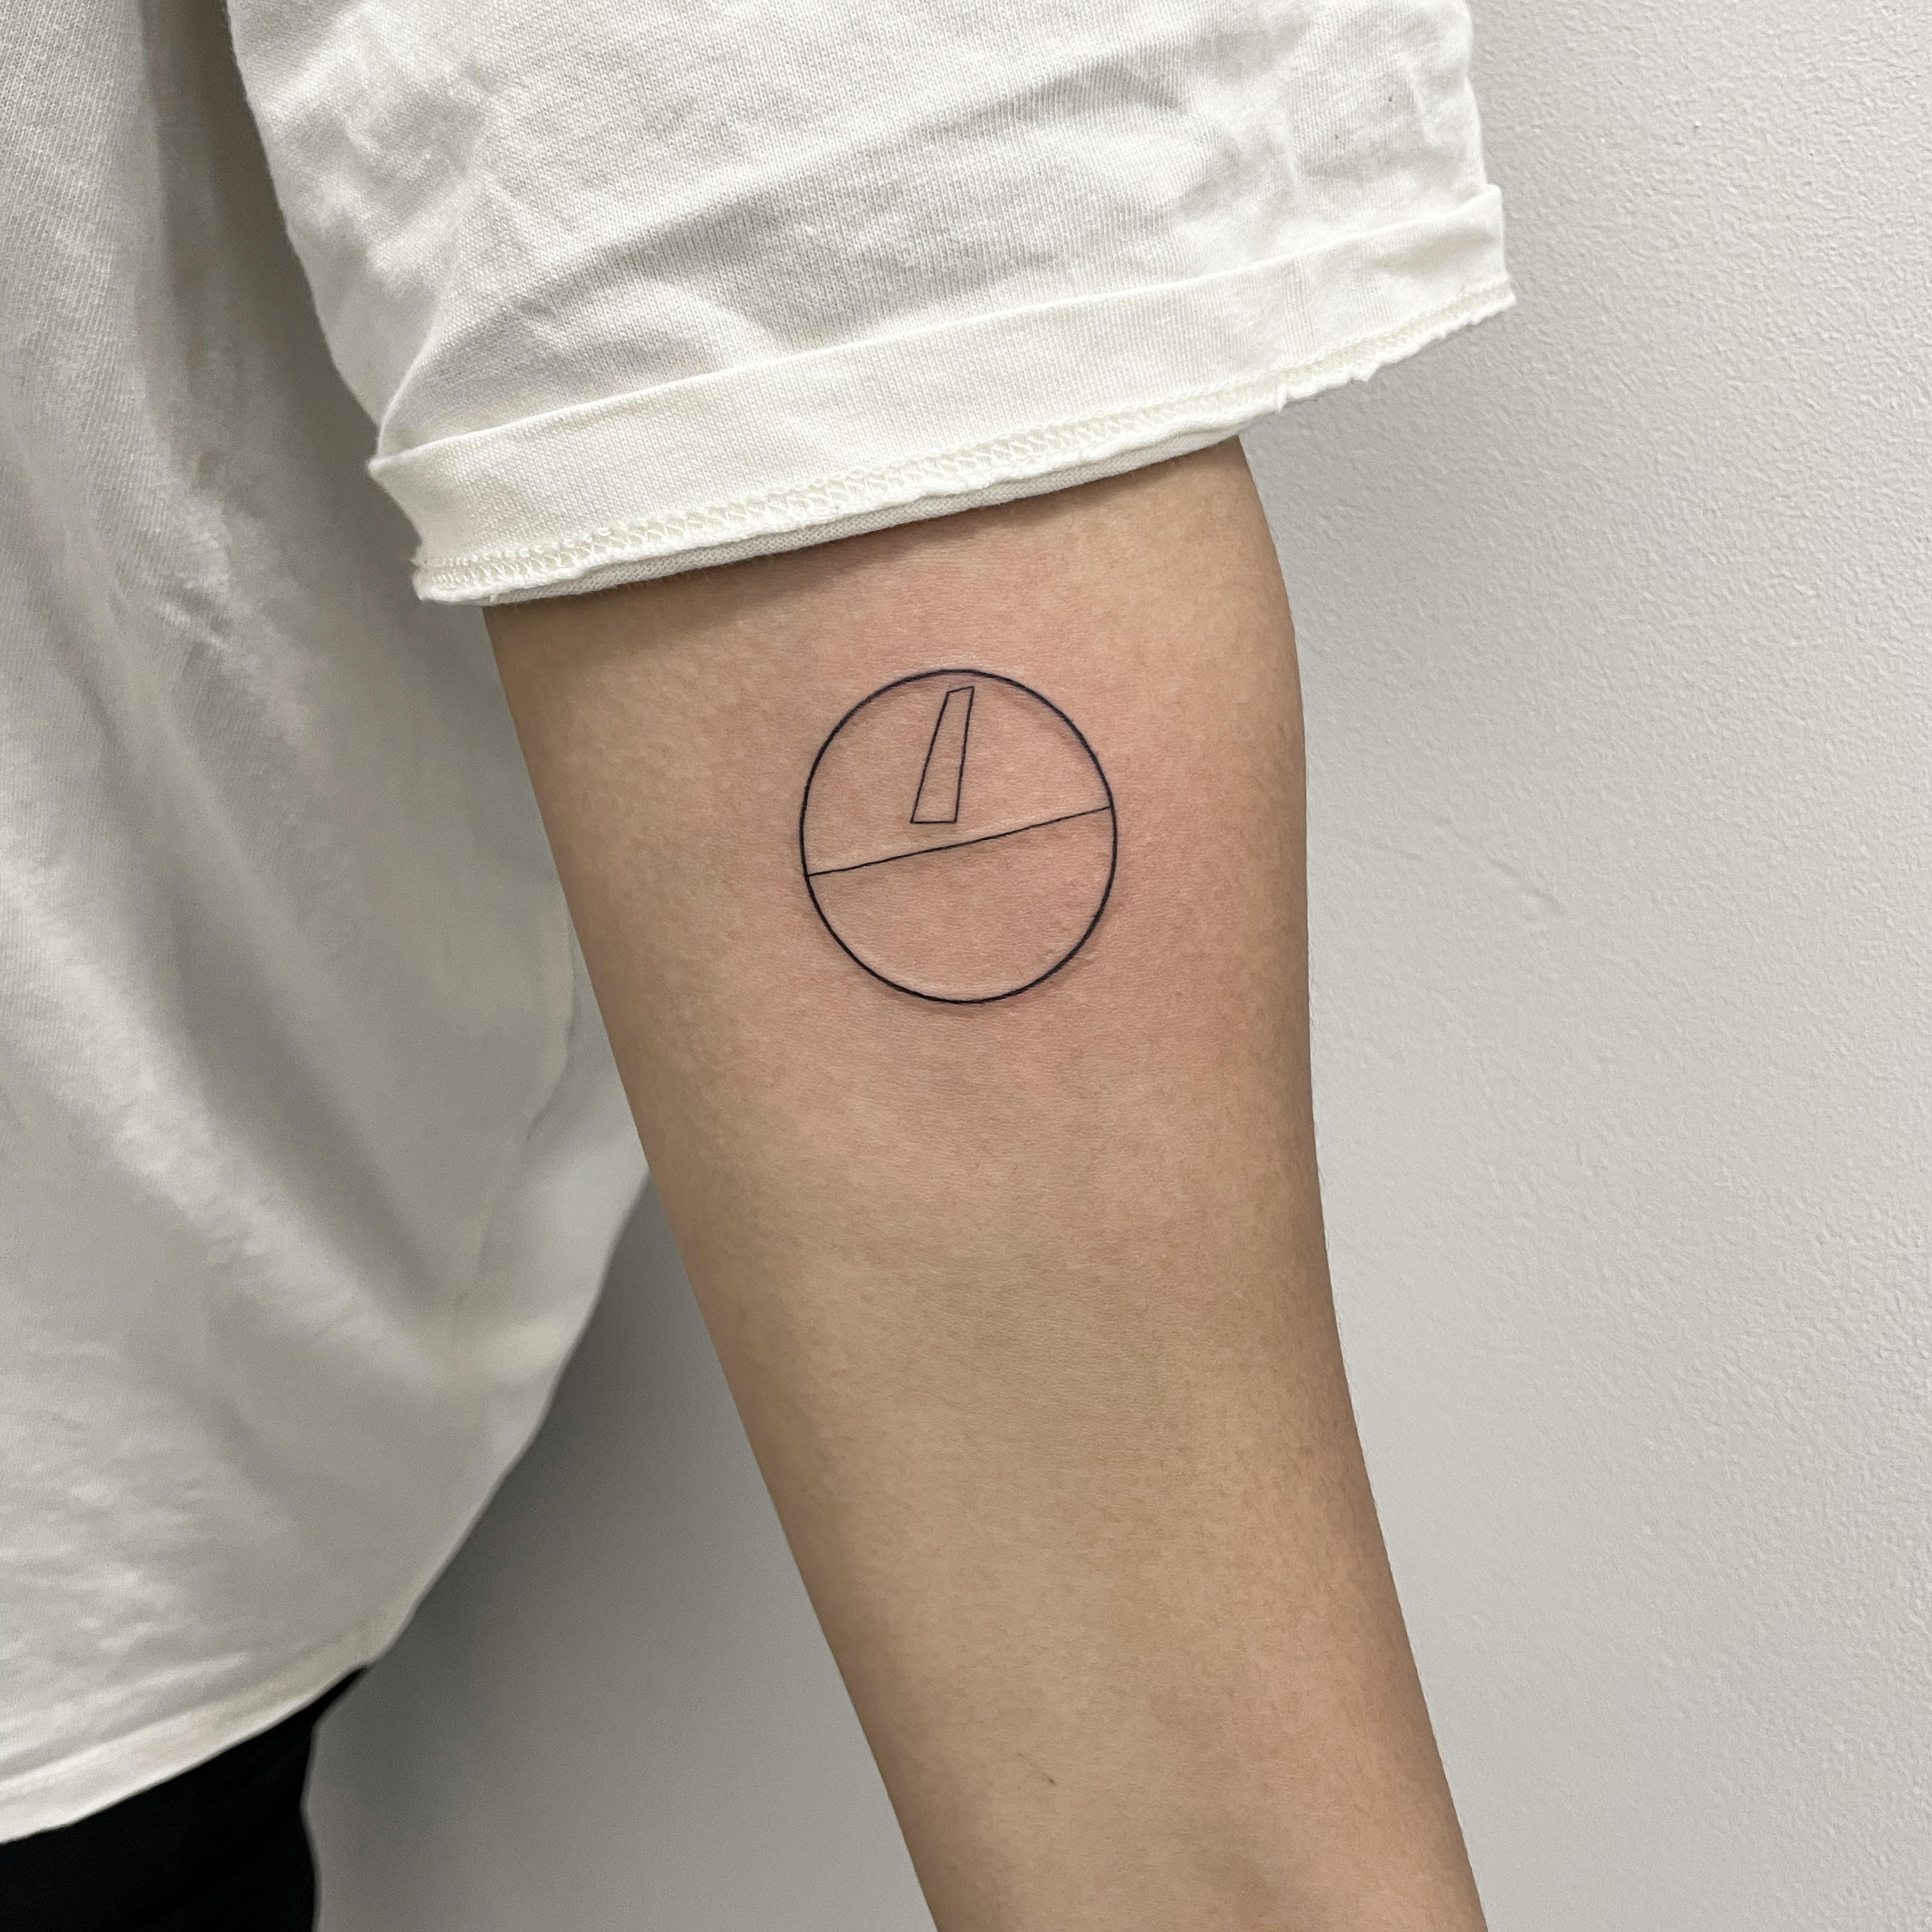 Kite outline tattoo | Kite tattoo, Small tattoos, Tattoos with meaning